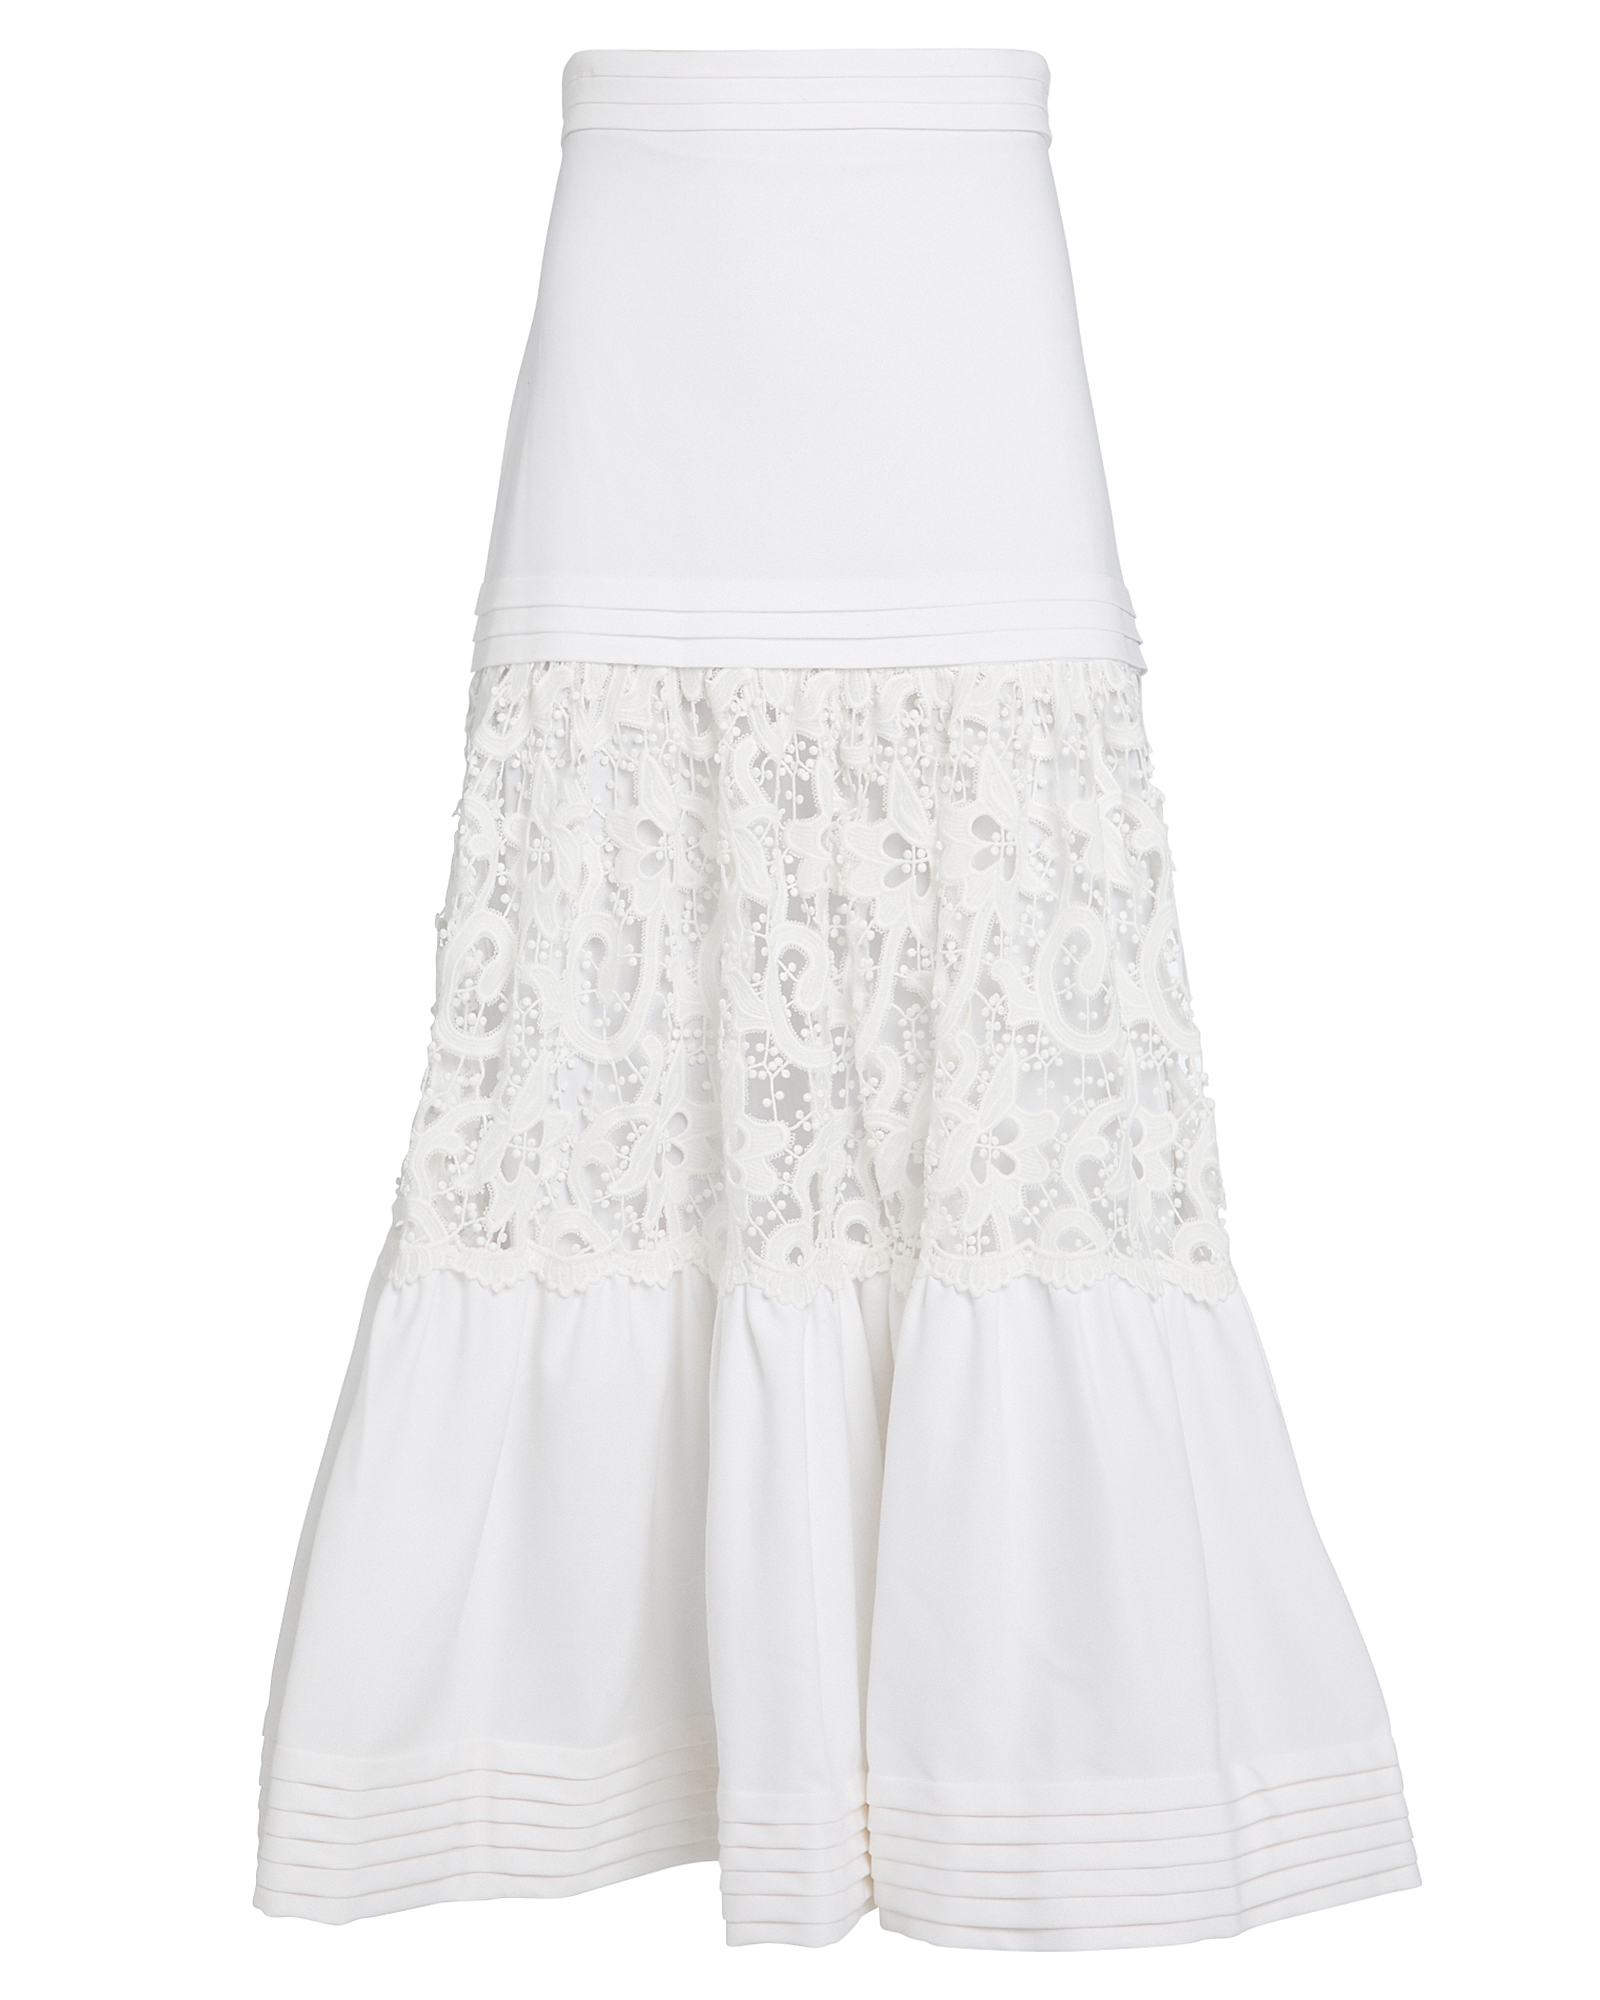 ALEXIS ALEXIS GWENDA EMBROIDERED LACE SKIRT,060046455943